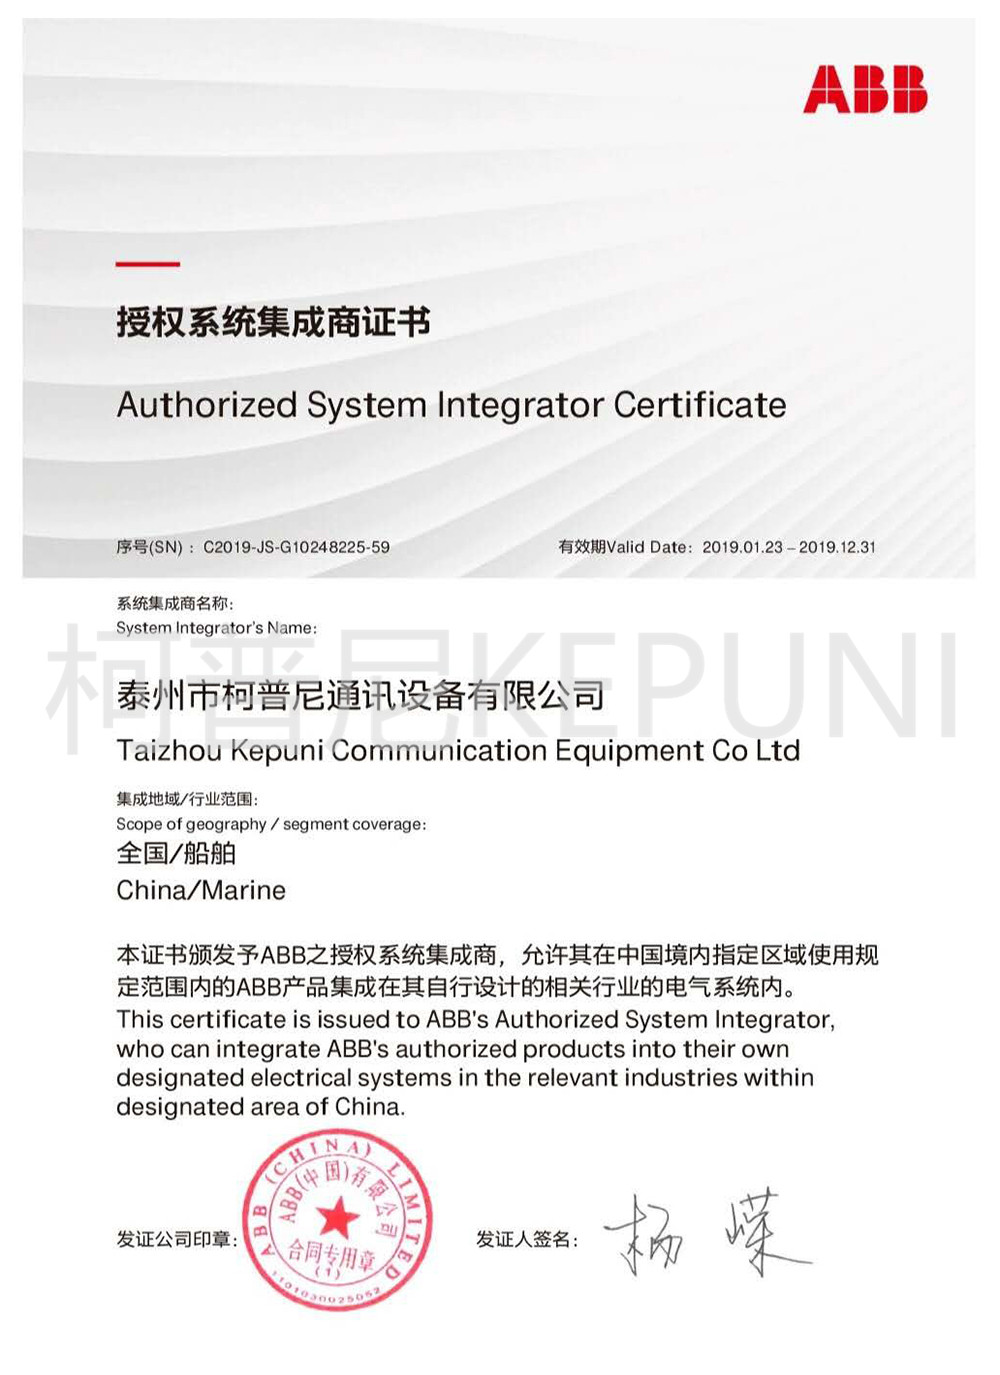 ABB authorized system integrator certificate